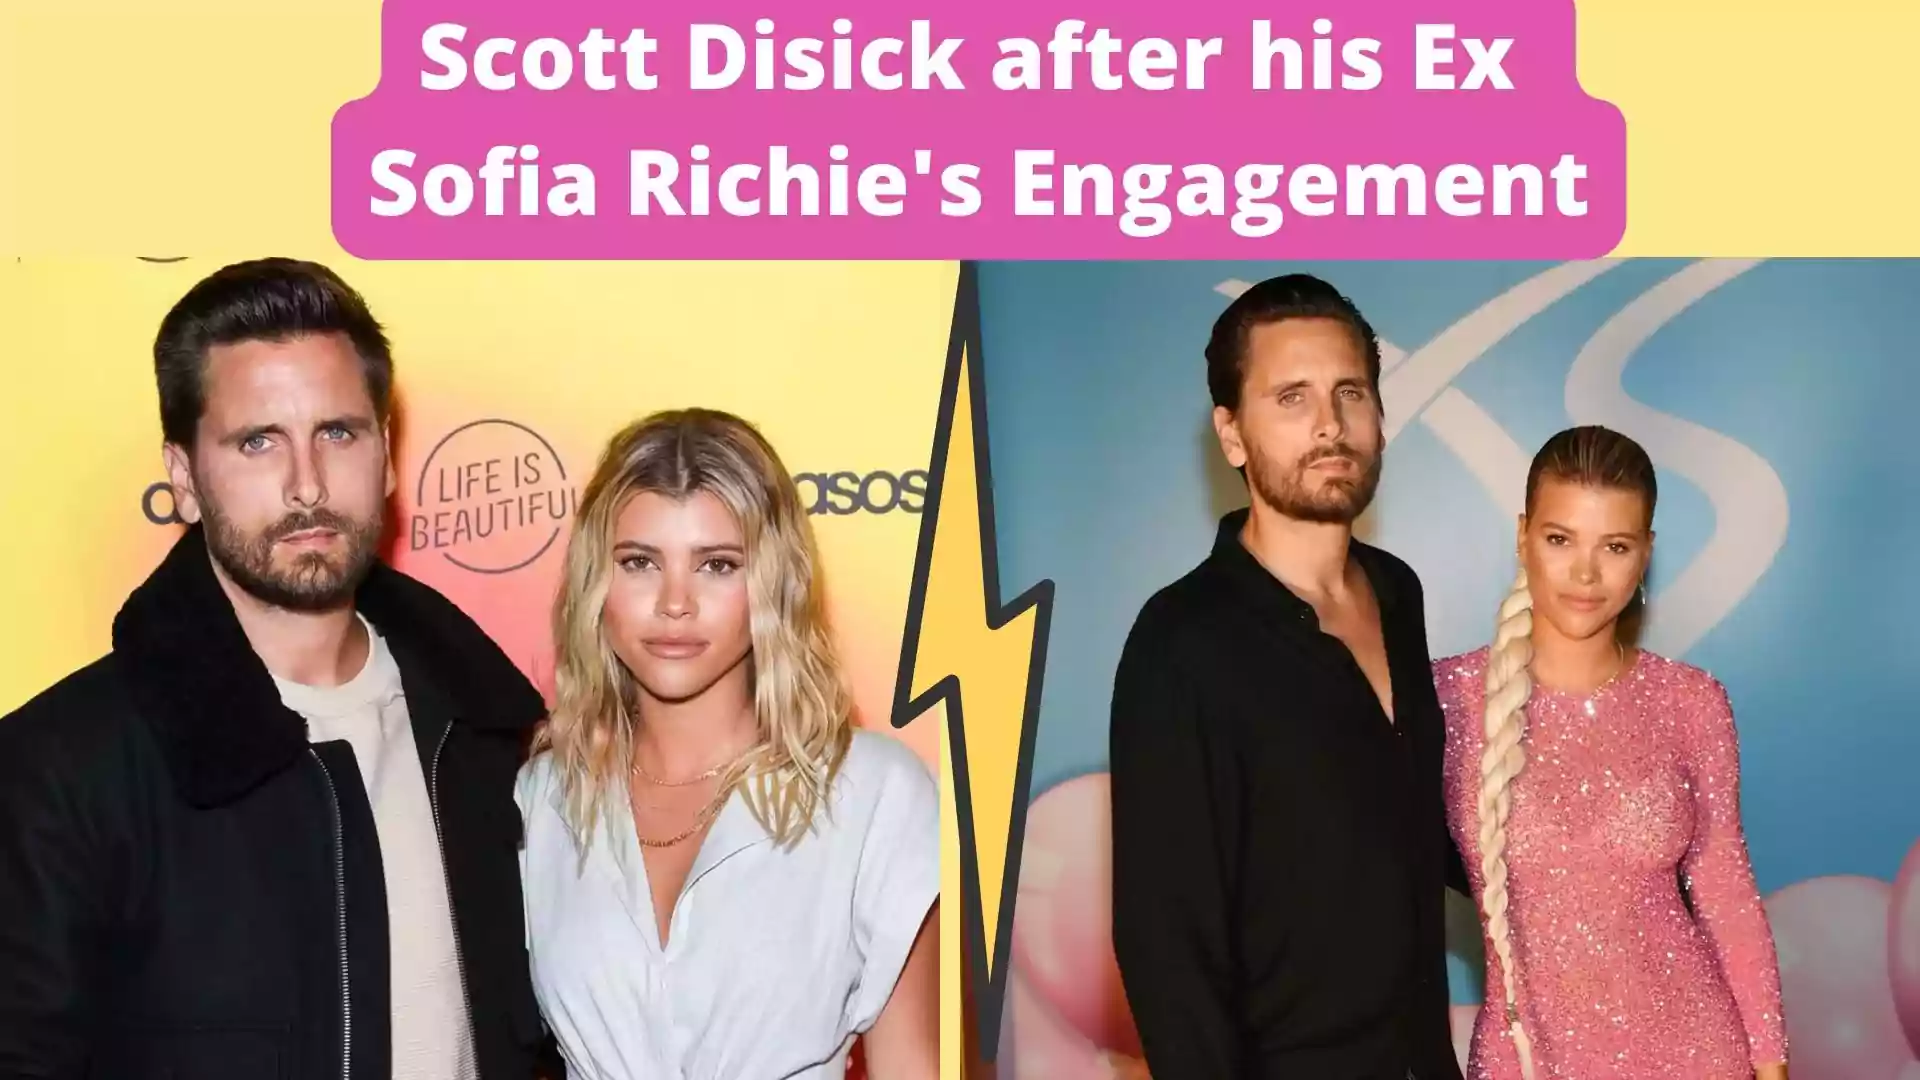 Scott Disick after his Ex Sofia Richie's Engagement wallpaper and images